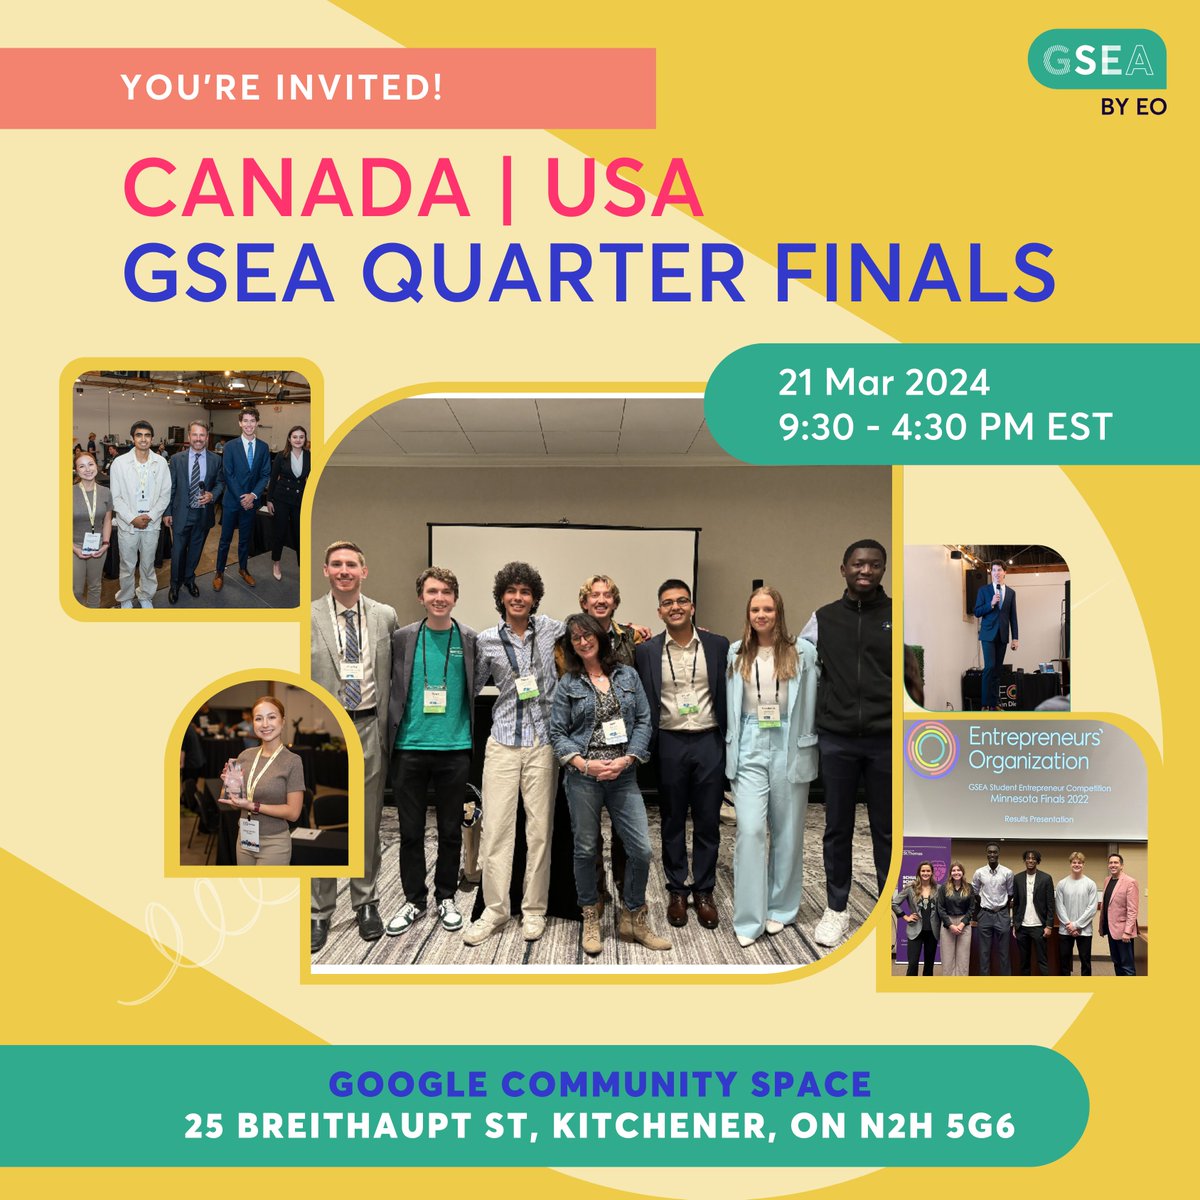 Are you ready?! All eyes turn to Kitchener as the US and Canada GSEA competitions take center stage! With a distinguished panel of judges, including members of @entrepreneursorg, this promises to be an event filled with inspiration and excitement! ✨ #EO #GSEA #GSEA2024